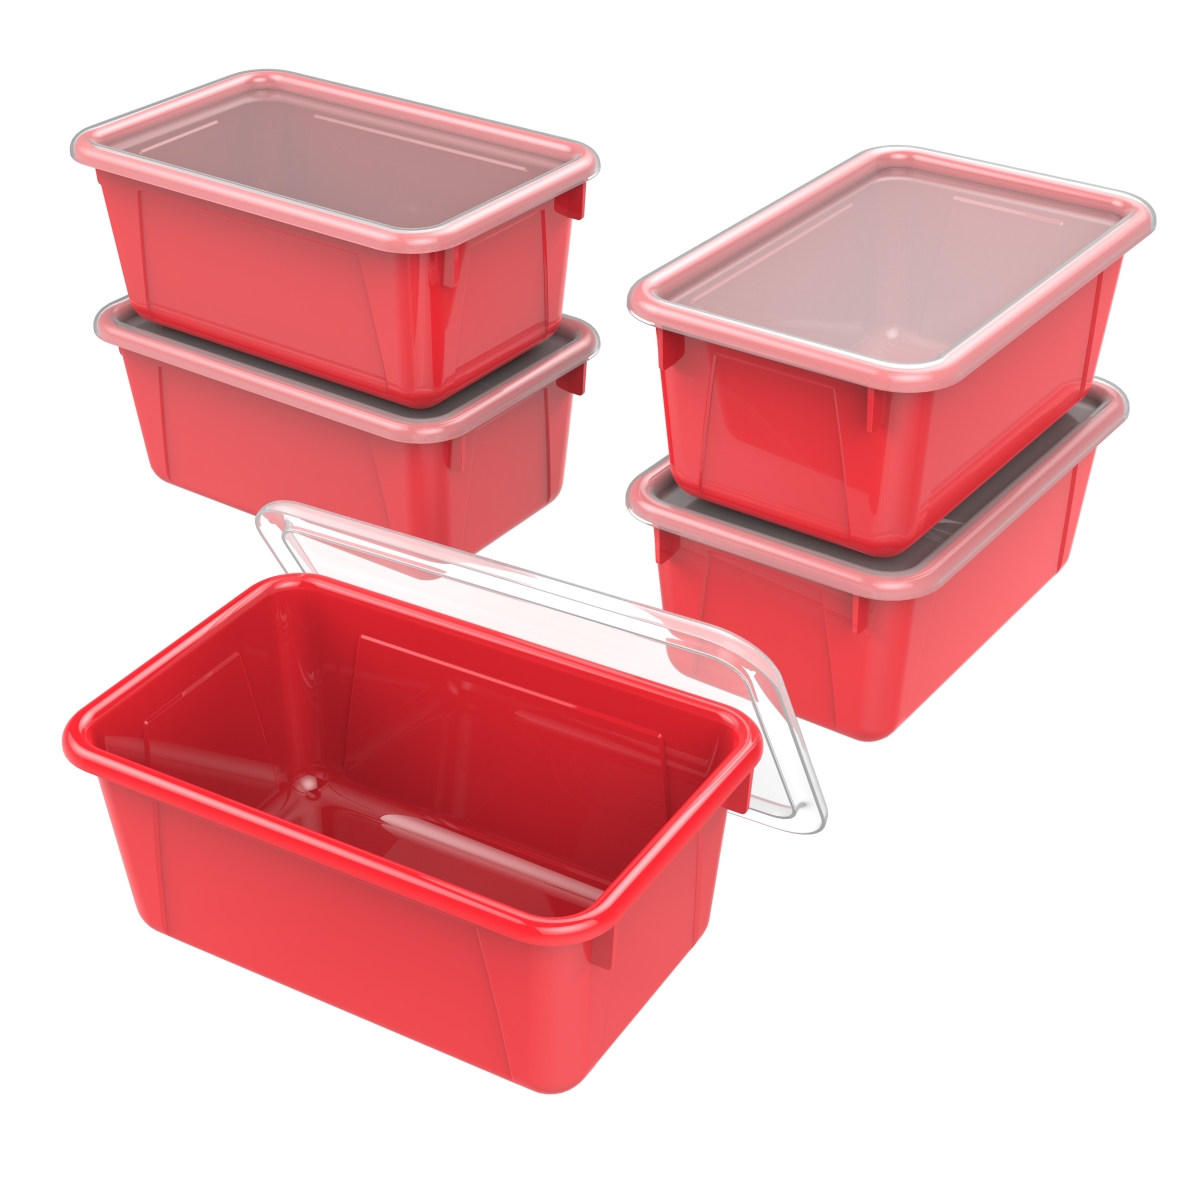 Classroom Small Cubby Bin With Cover, Red - Pack Of 5